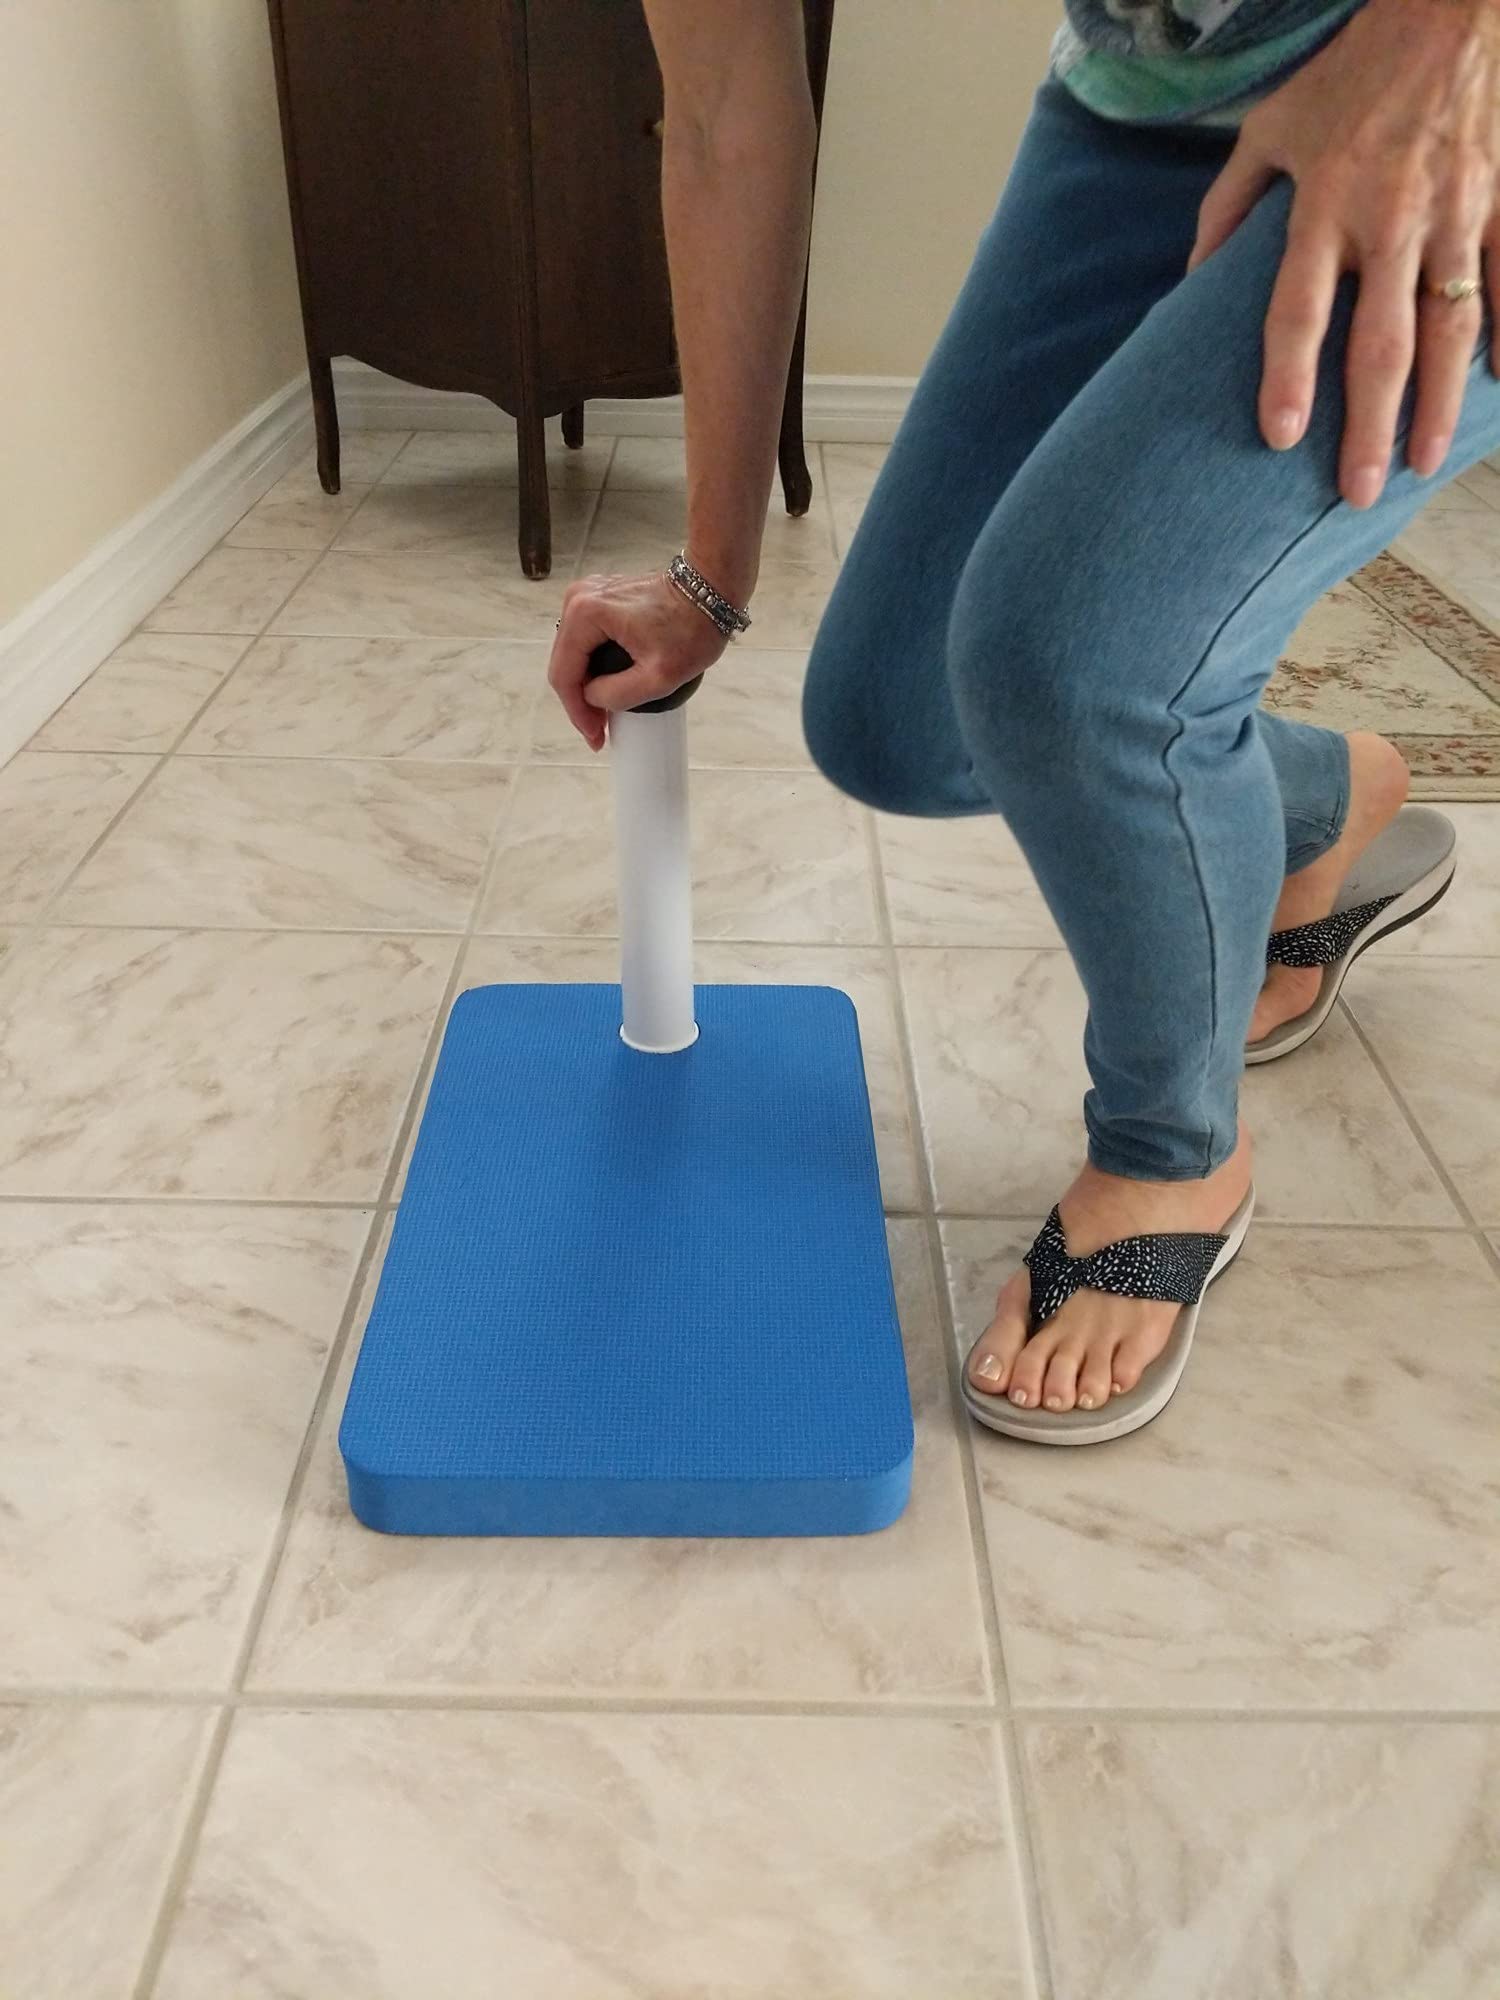 Buy Kneeling Pad Help-Me-Up With support handle to reduce knee